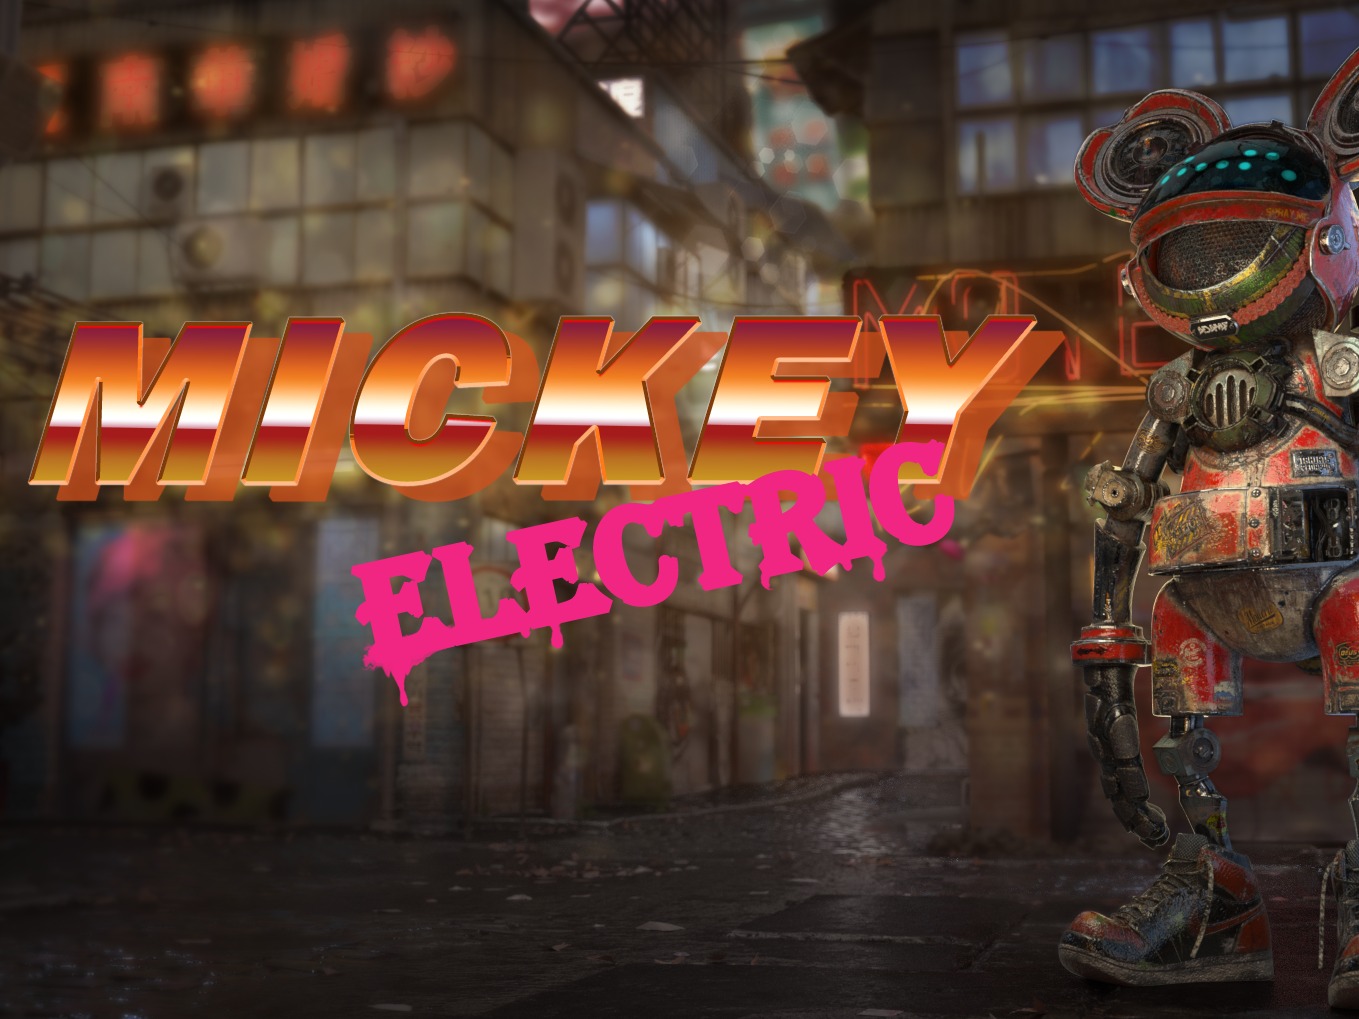 Electric Mickey